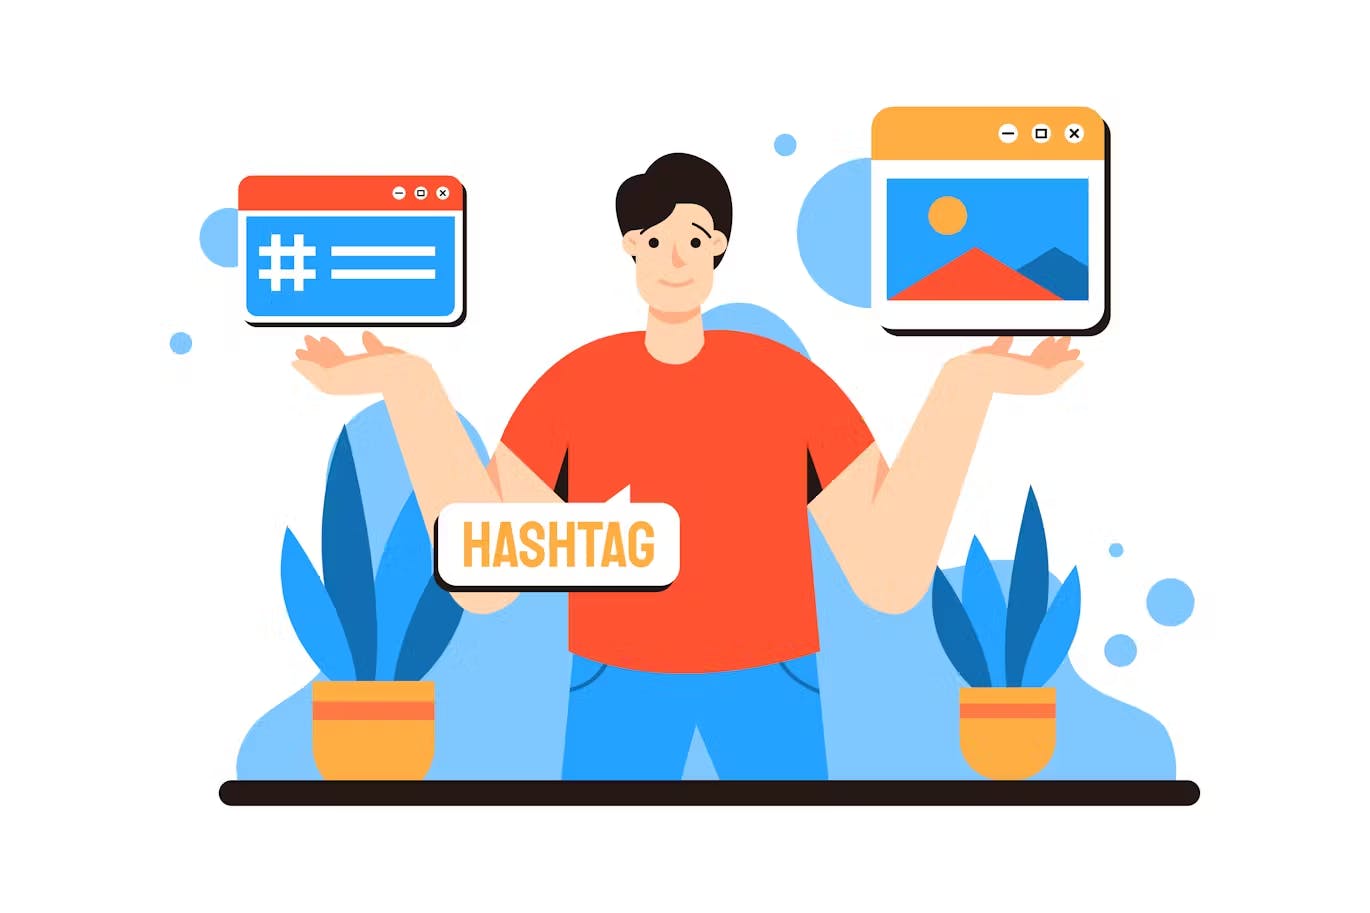 Best hashtags to use to grow your business in Dubai